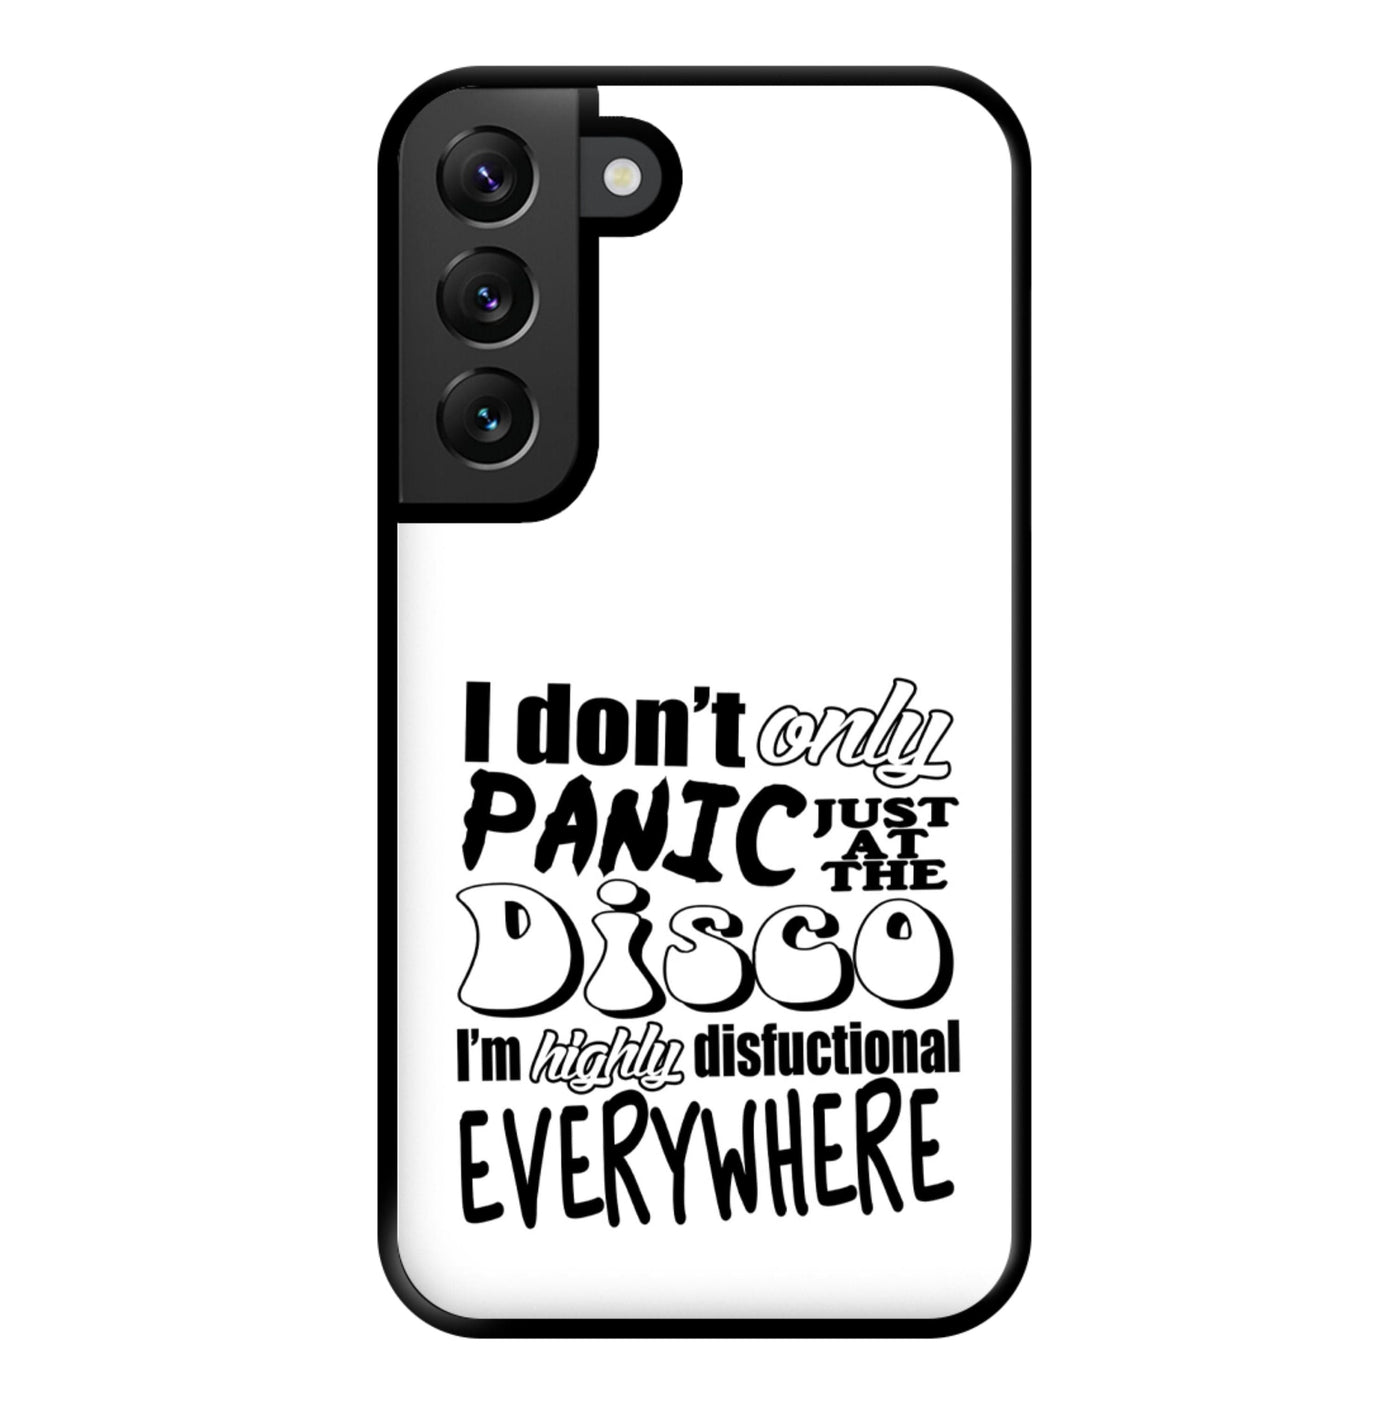 I'm Highly Disfunctional Everywhere - Panic At The Disco Phone Case